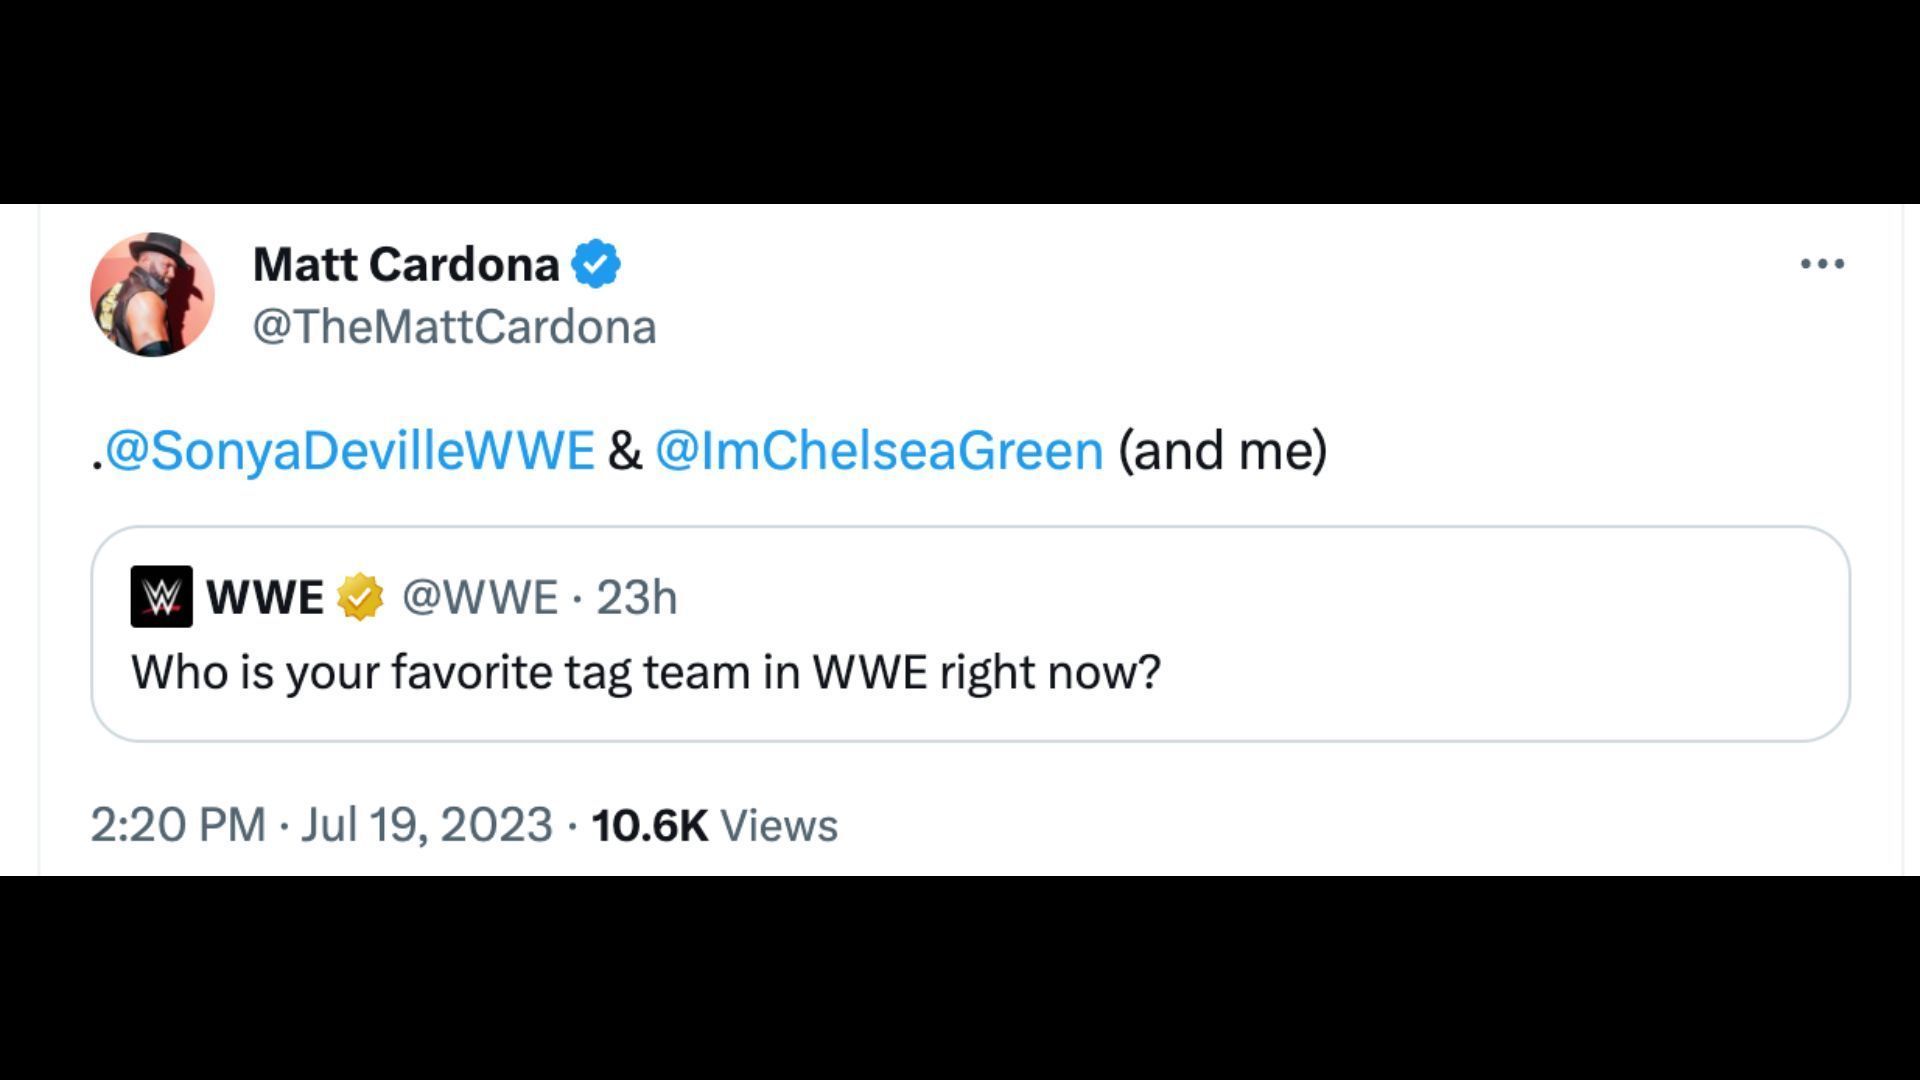 Matt Cardona claims he is a part of the most popular team in the company.